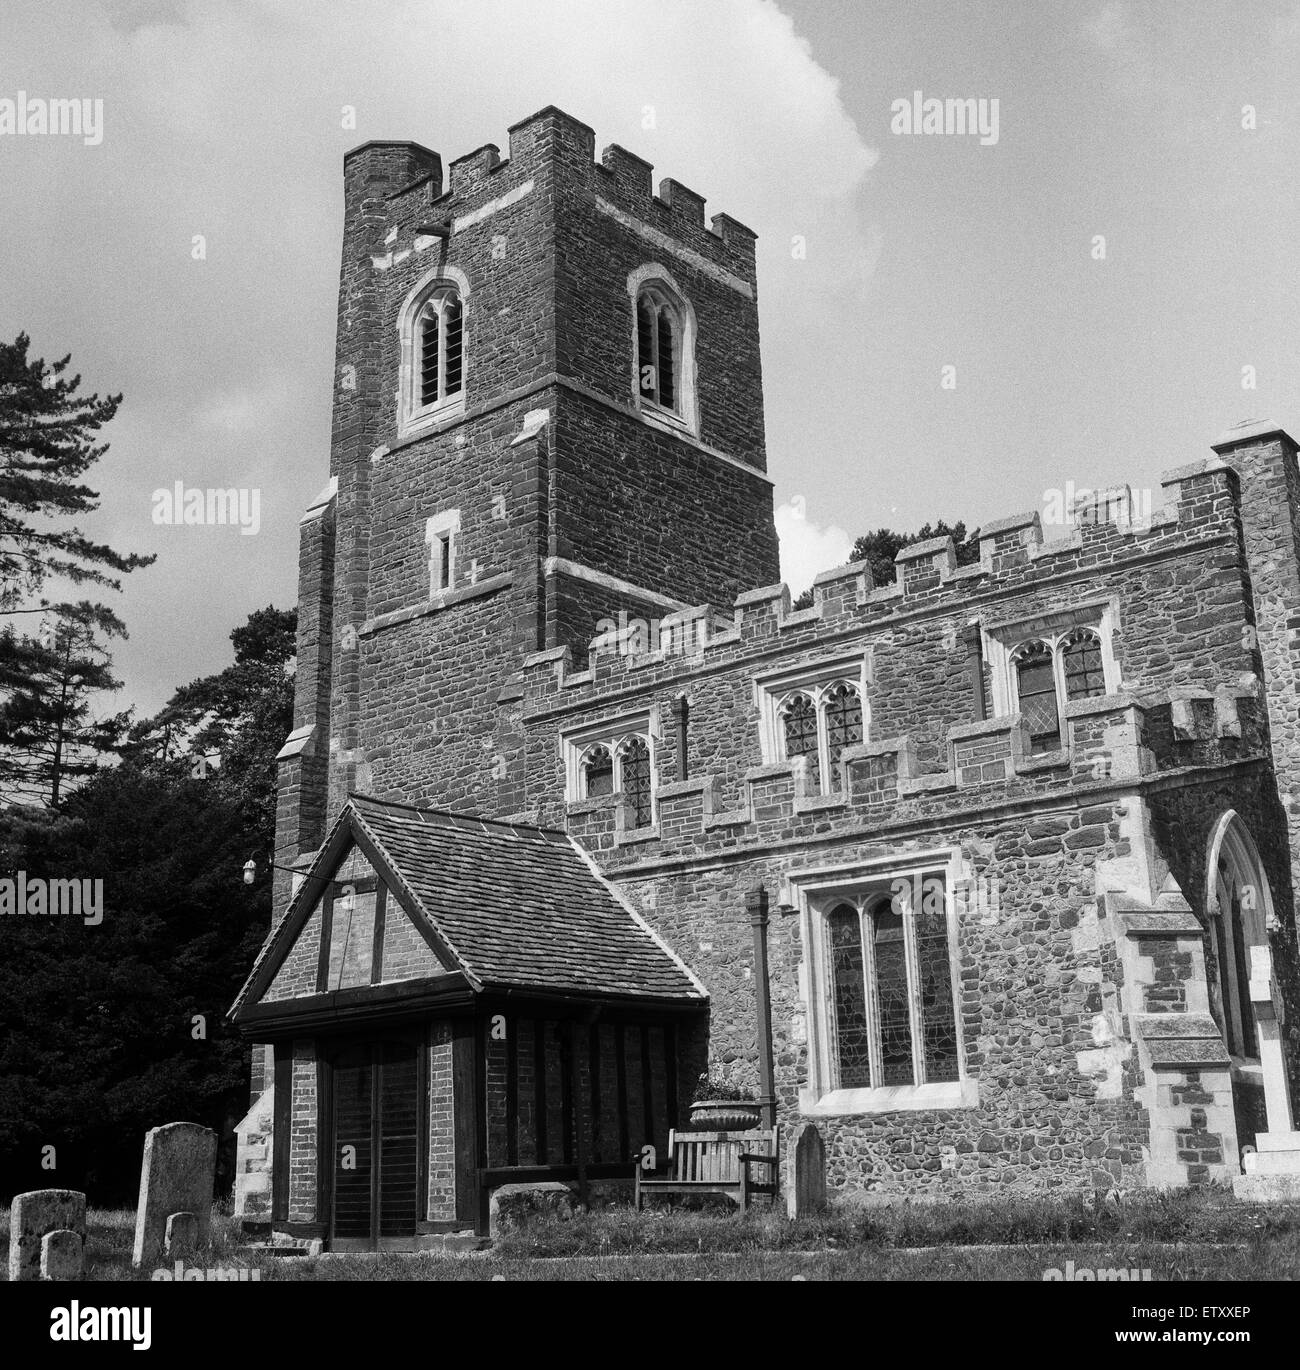 Church of St Peter & St Paul, Flitwick, Bedfordshire. 17. August 1962. Stockfoto